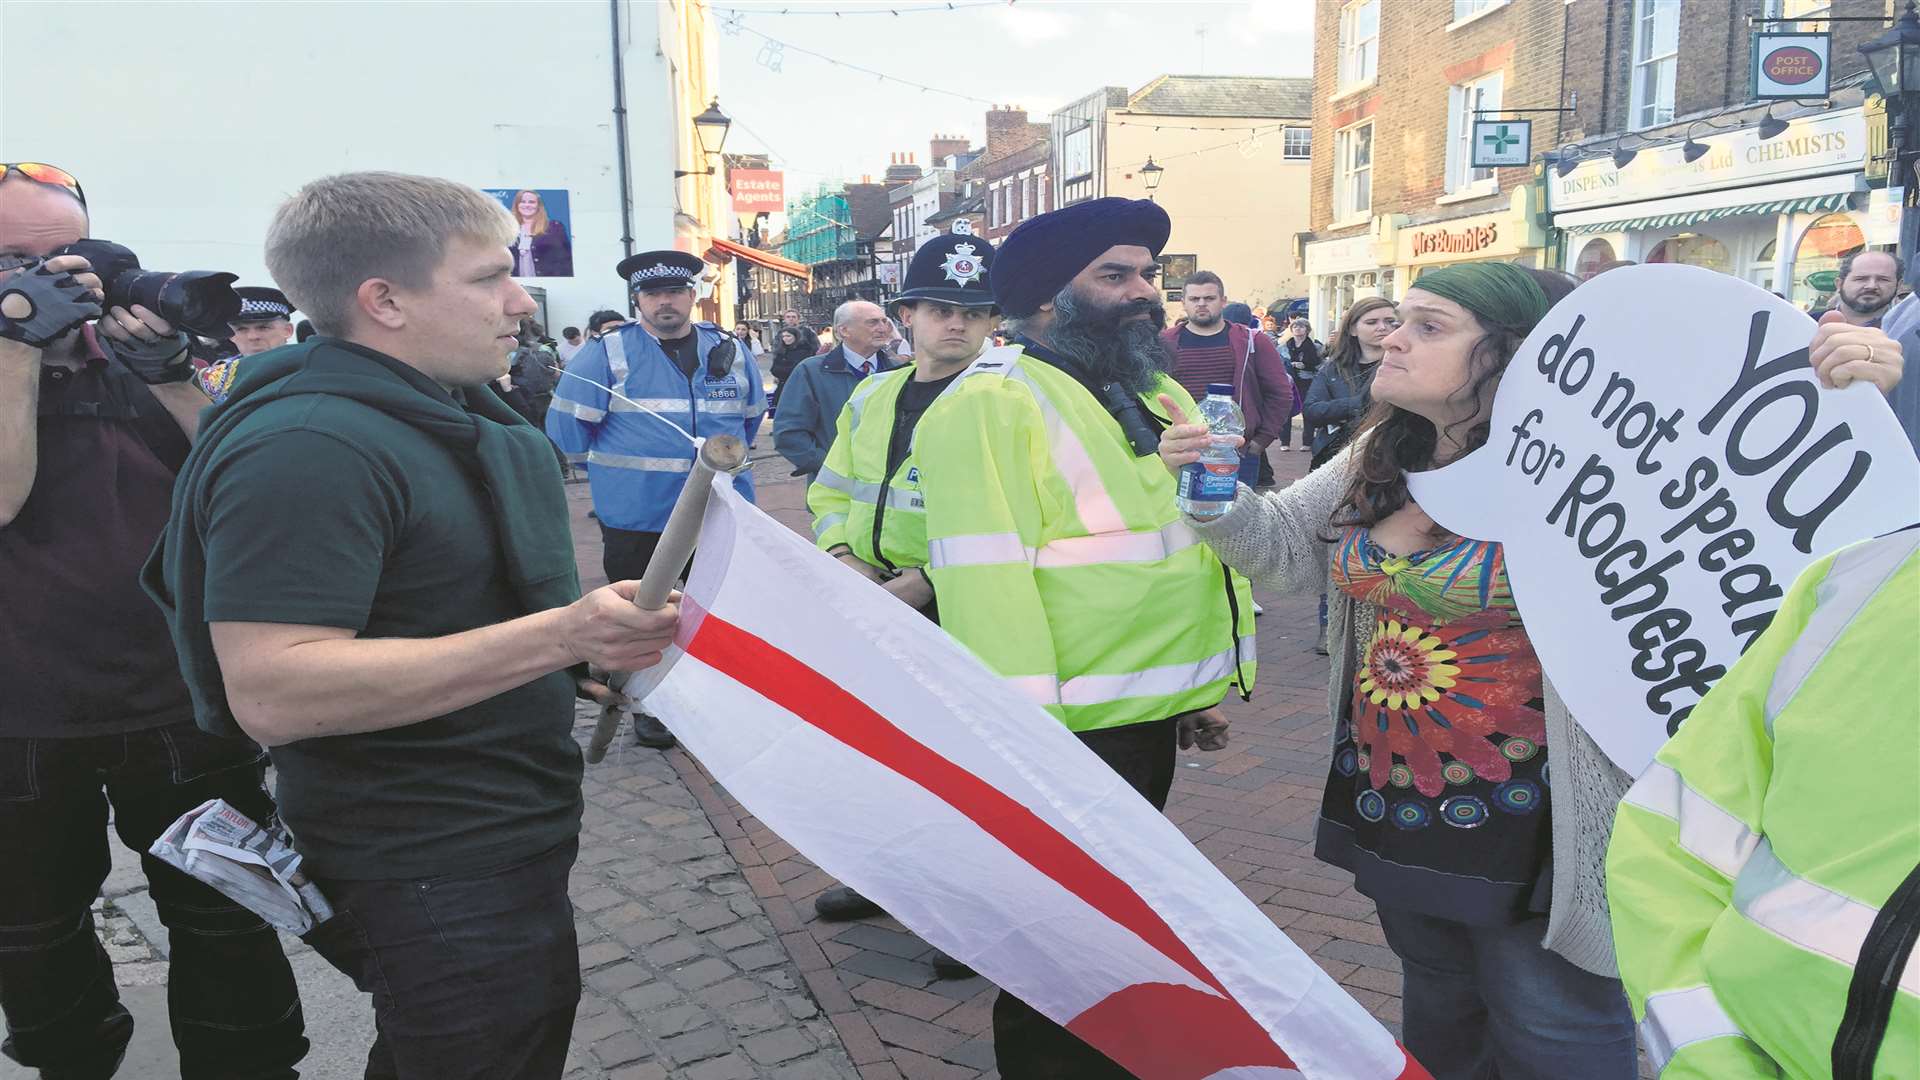 Demonstrators for Britain First recently clashed with anti-fascist protestors in Rochester